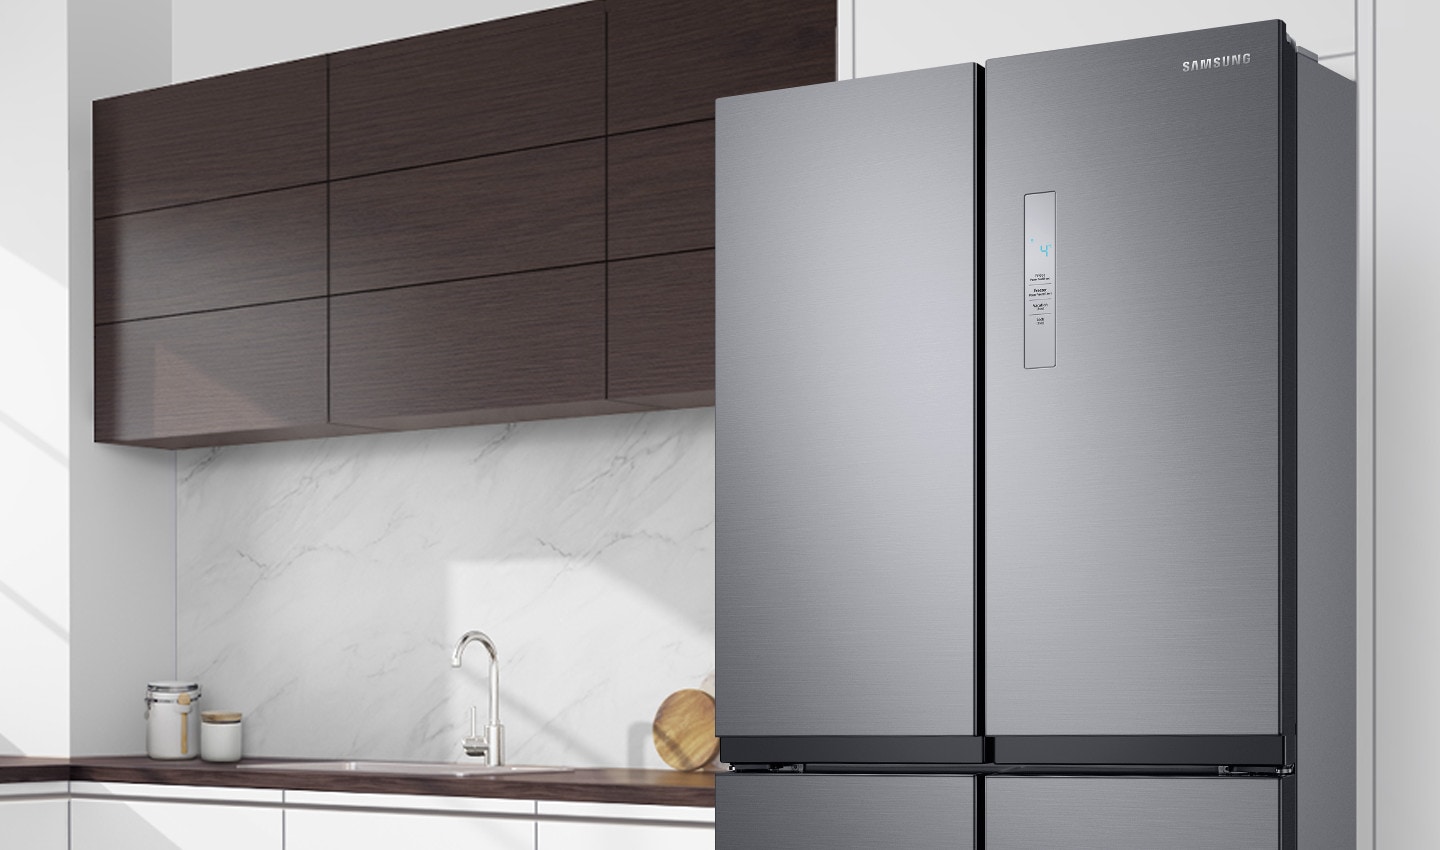 See the stylishly minimalist design and controls of Samsung French Door Fridge with Twin Cooling, 511L when it is laid in a kitchen & check out the fridge price!